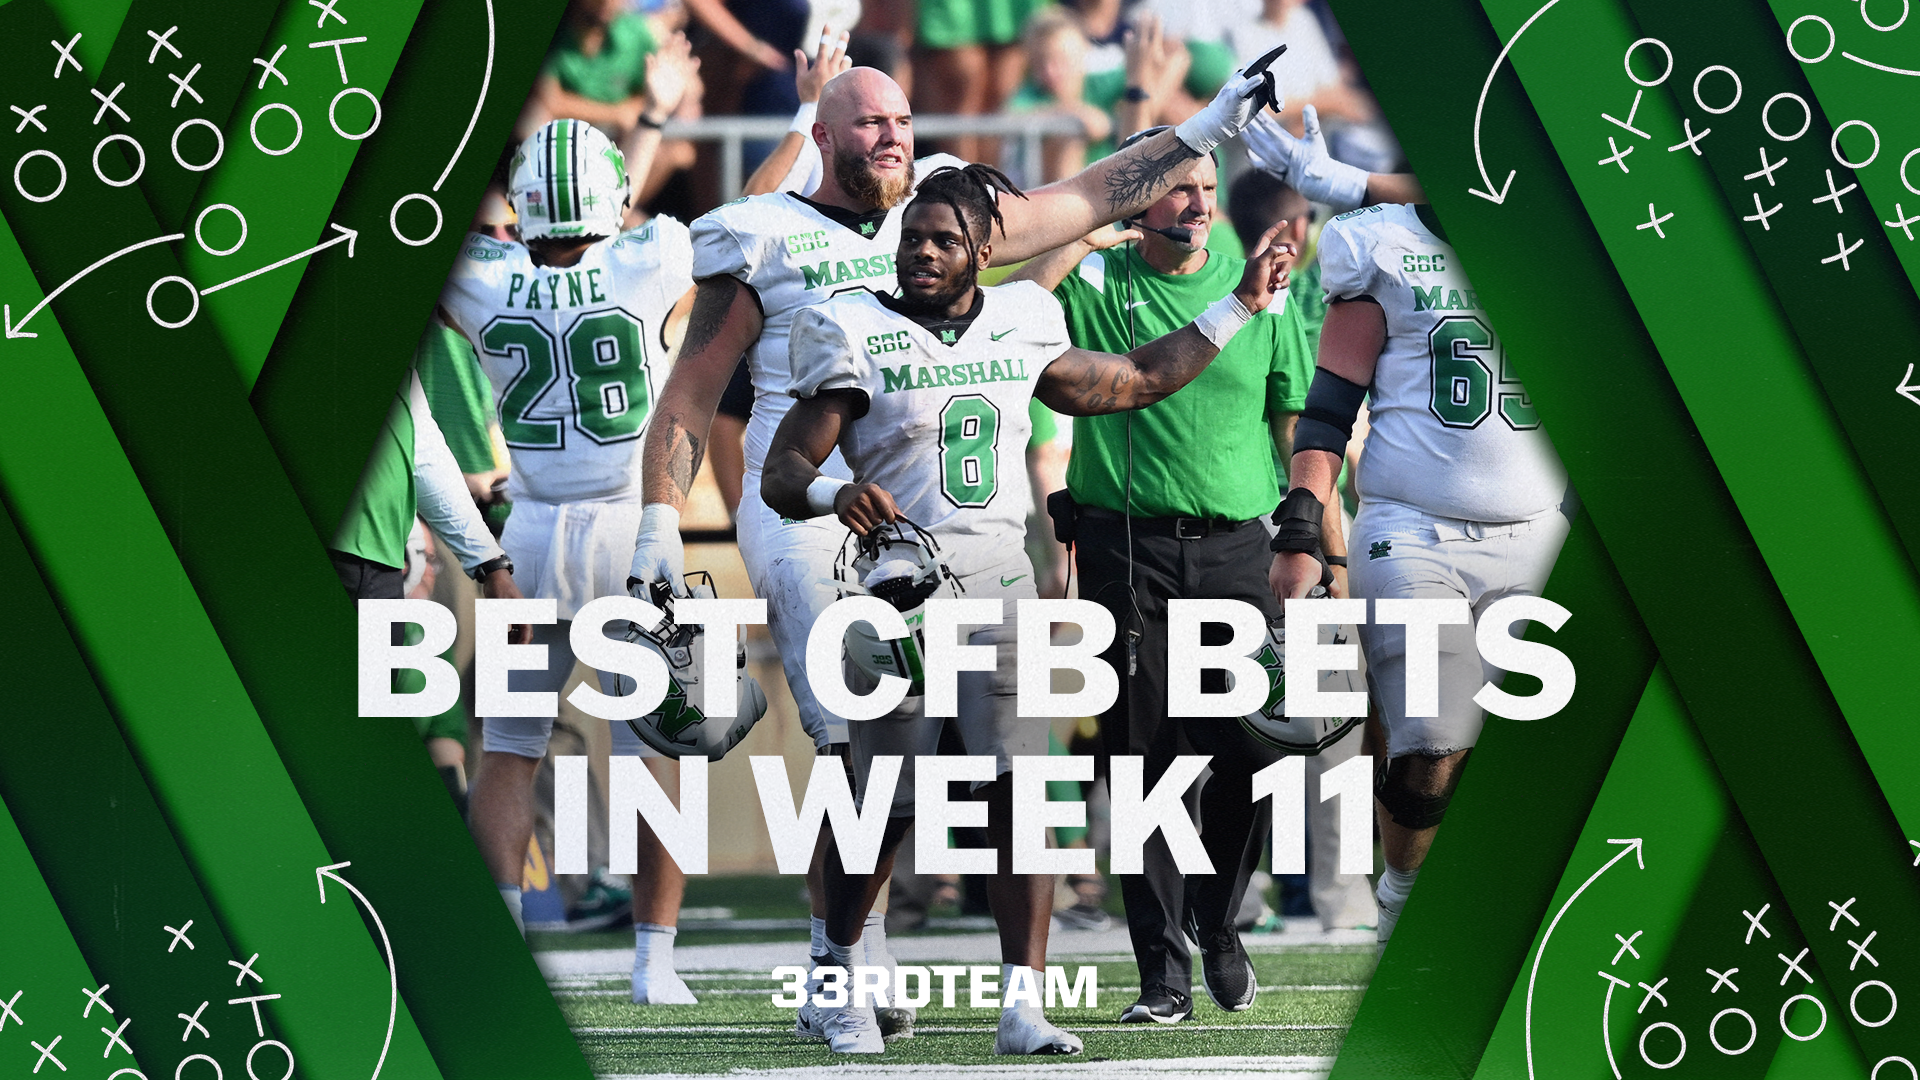 CFB Bets